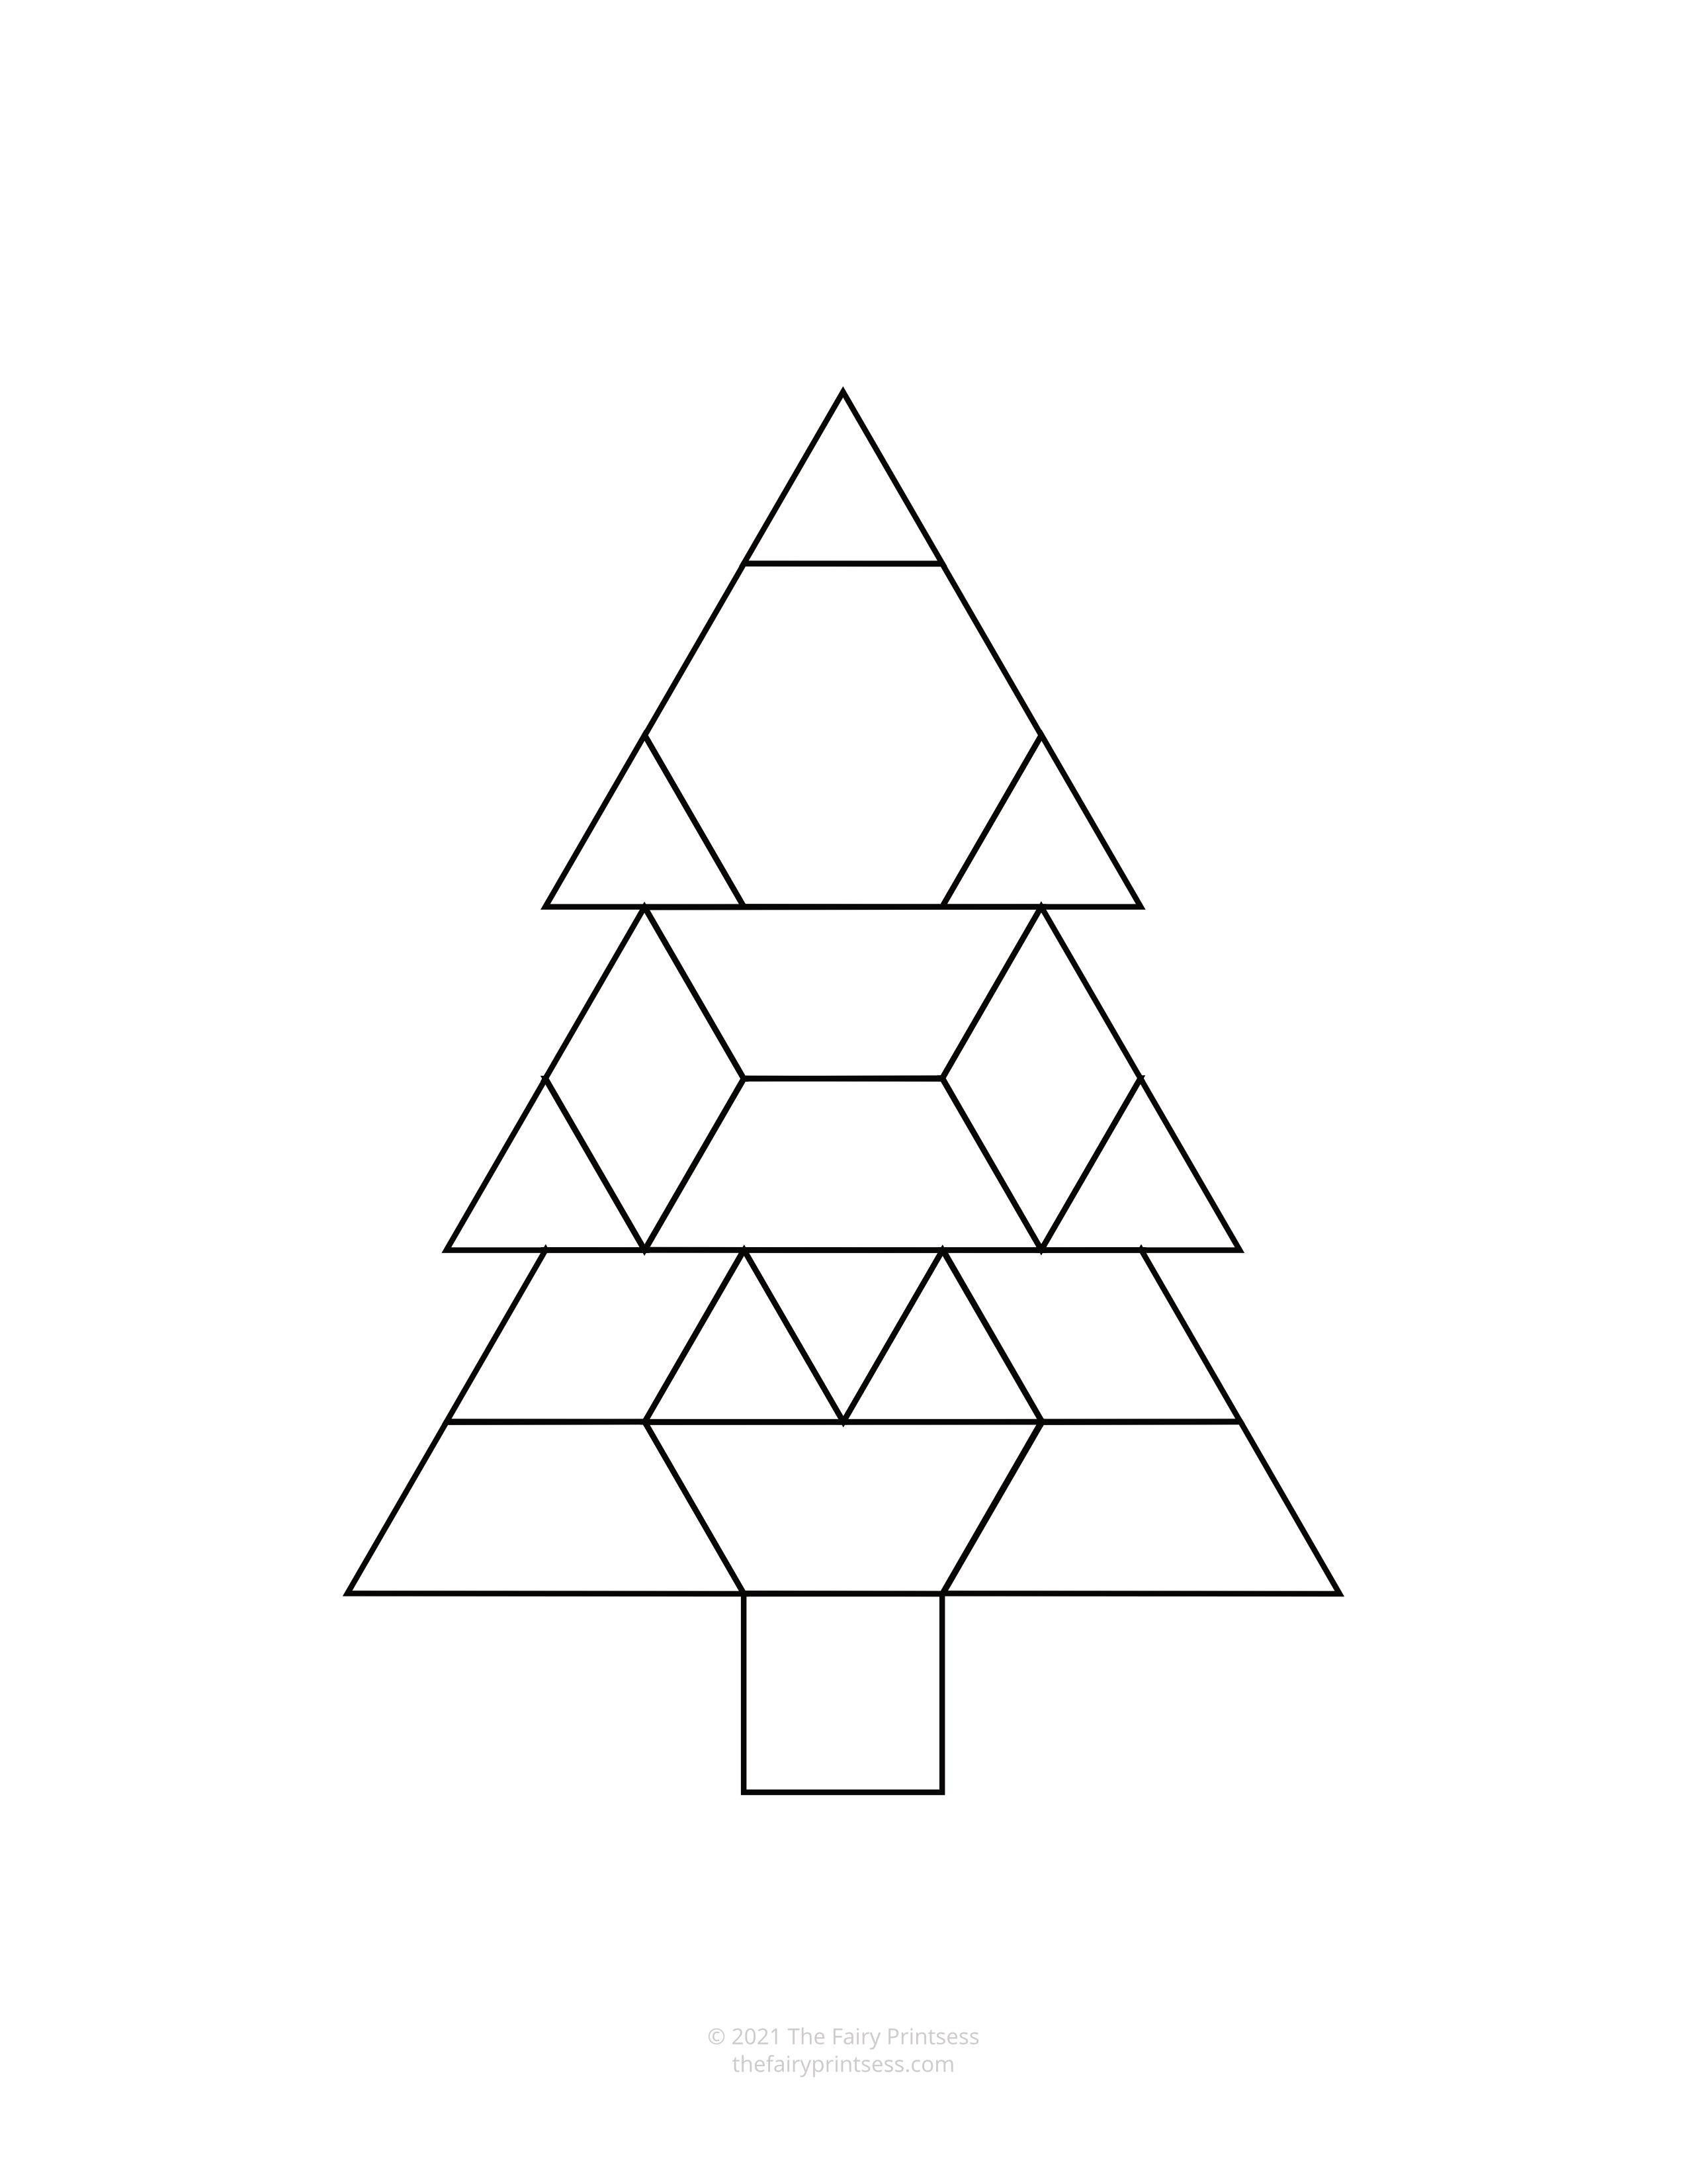 black and white tiered Christmas tree pattern block template shape mat free printable